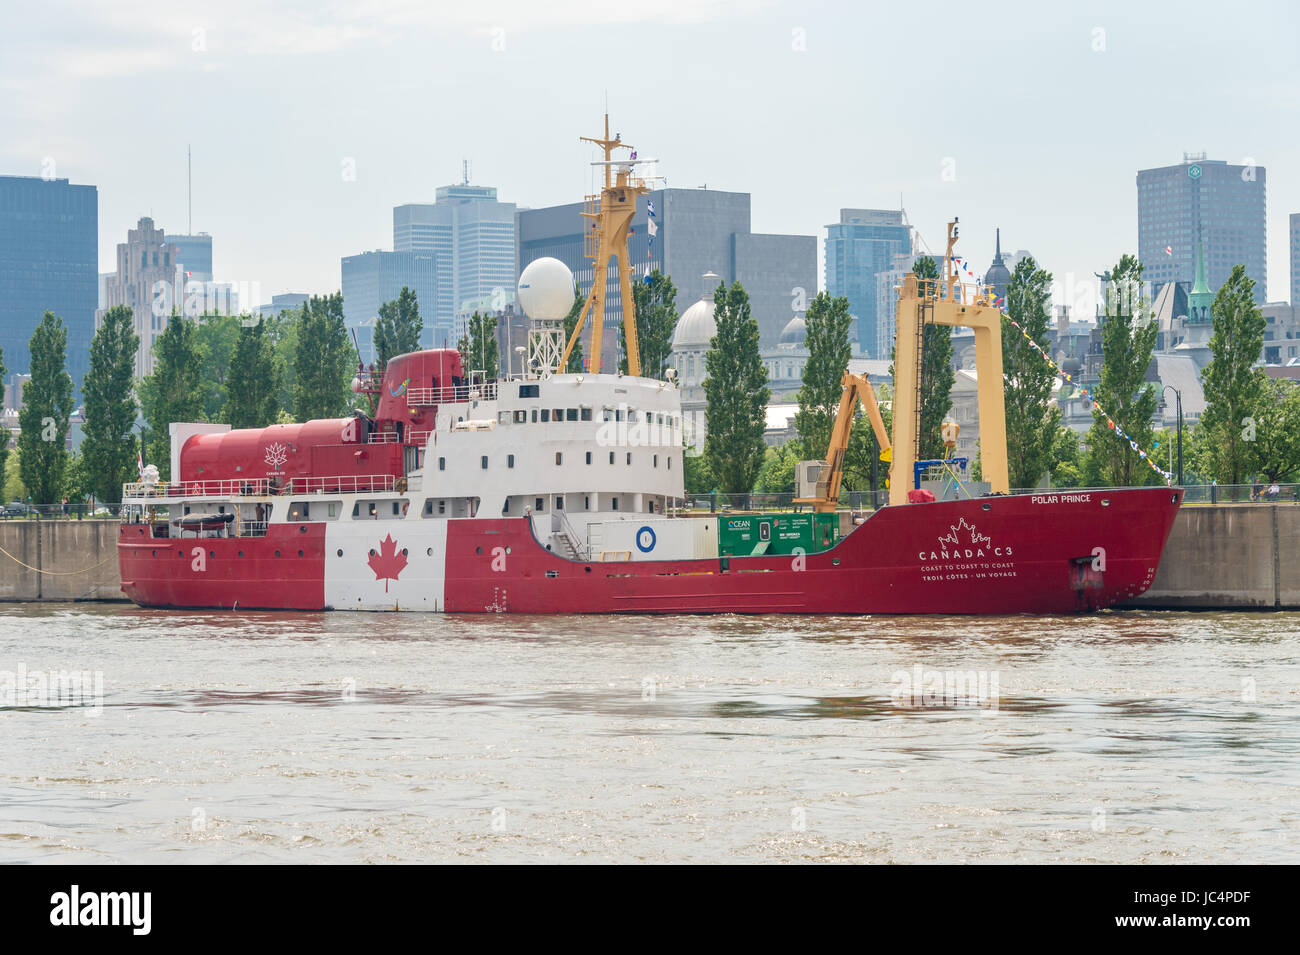 Montreal, CANADA - 12 June 2017: Icebreaker C3 cruising the Northwest Passage from Toronto to Victoria is moored in Montreal Old Port Stock Photo